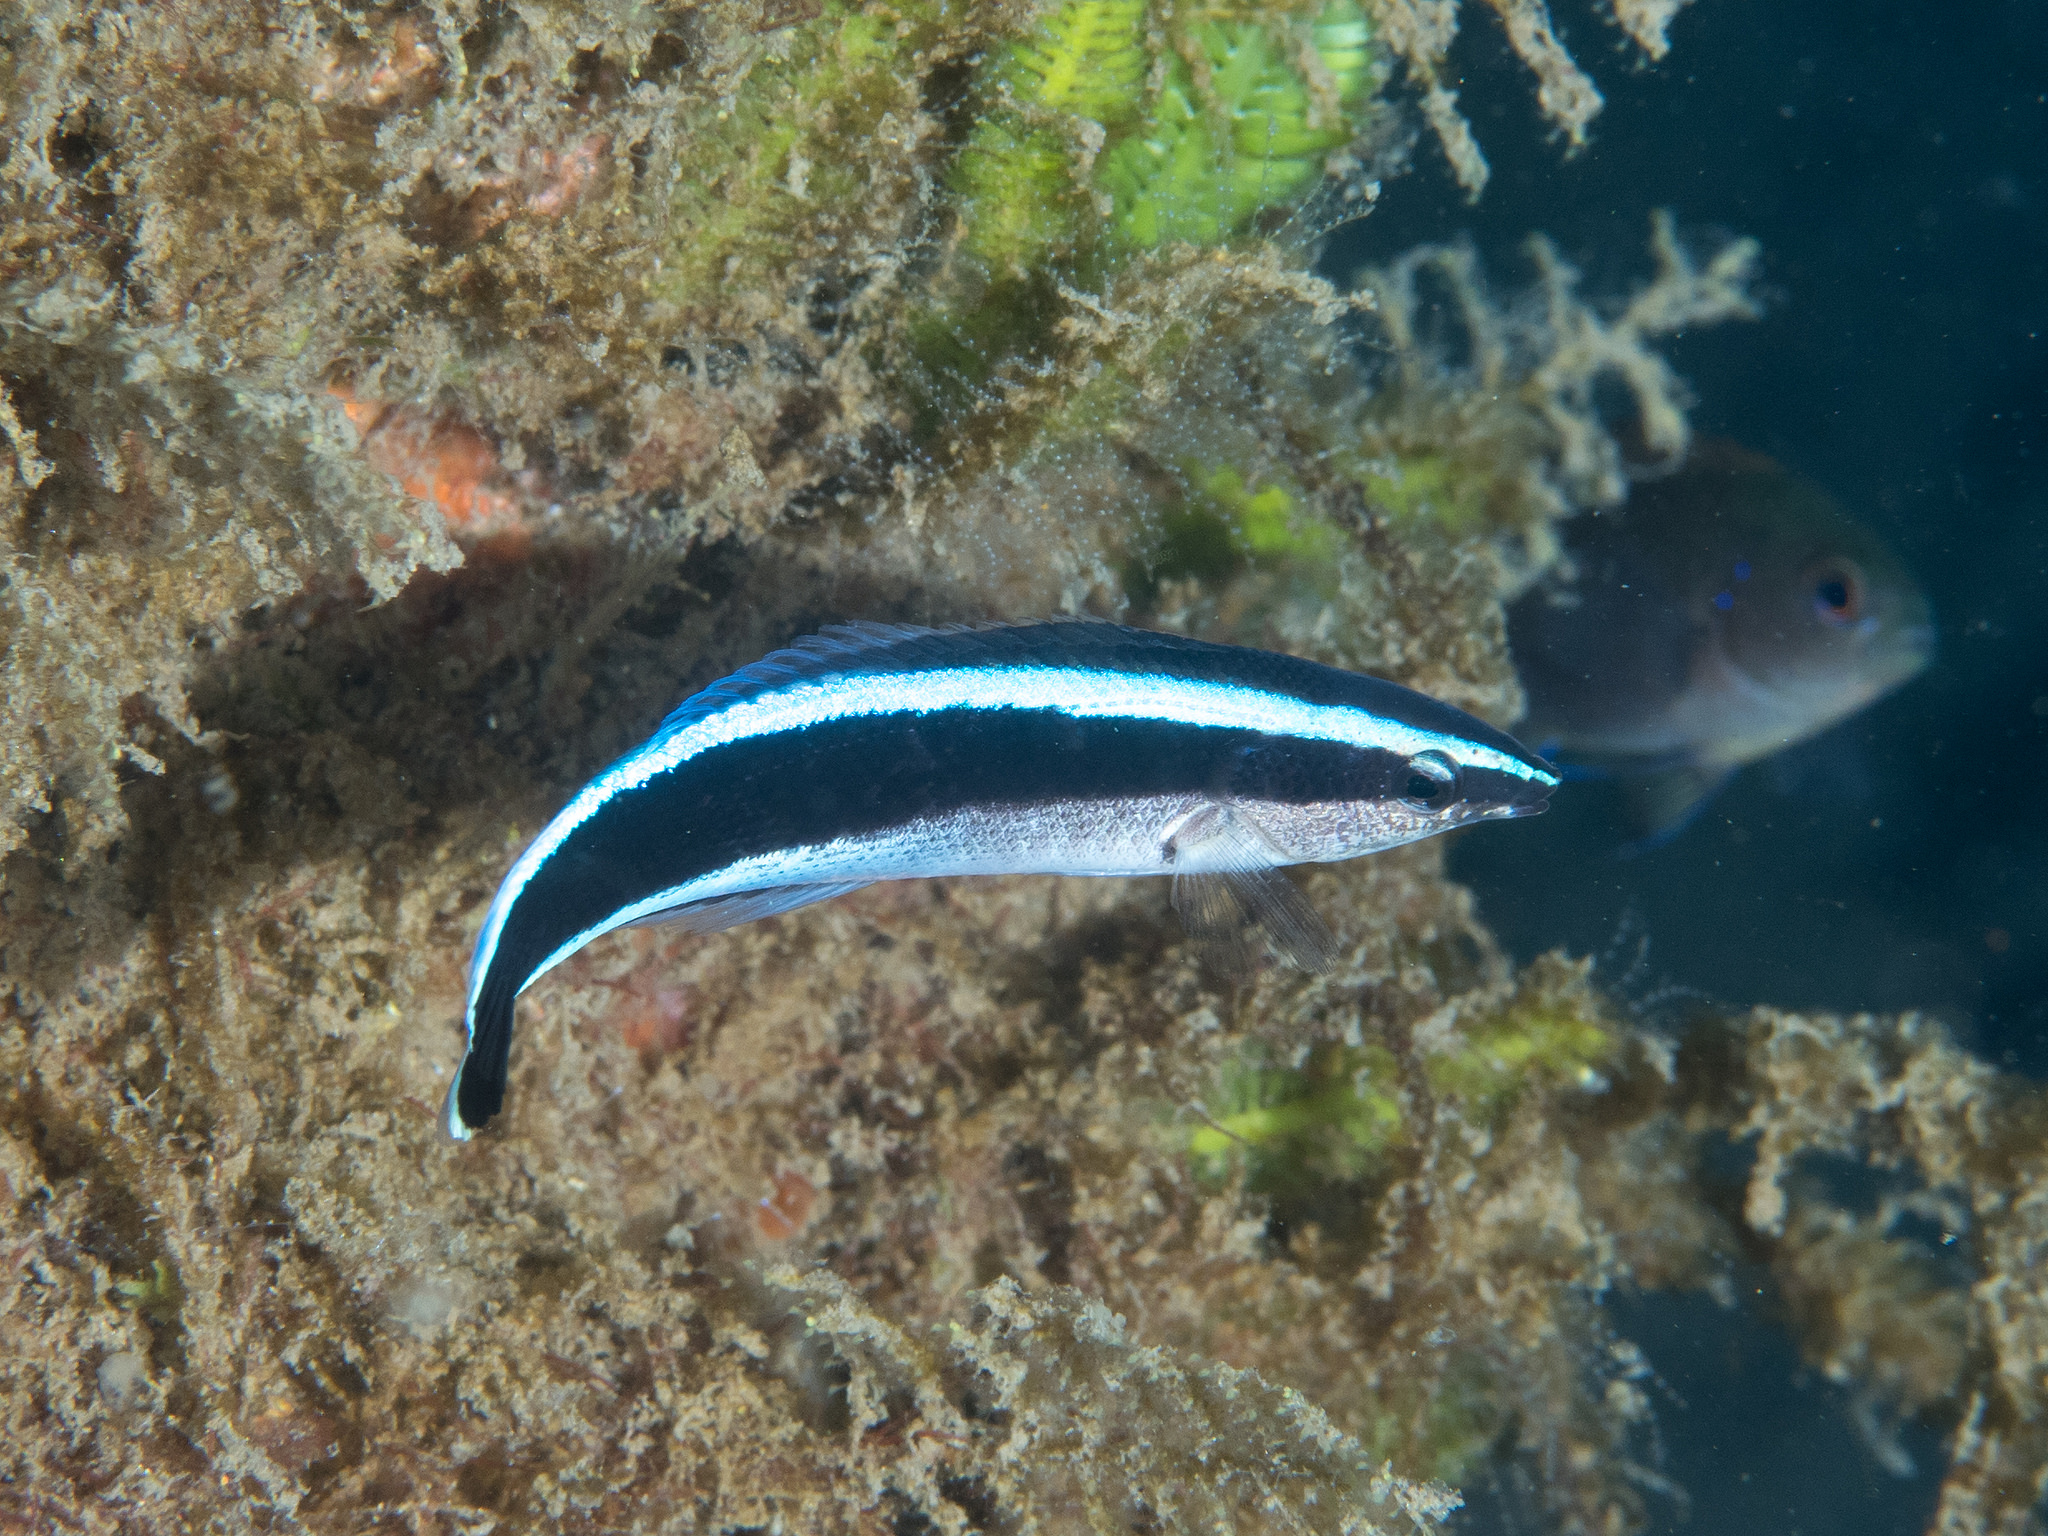 Photograph of a striped fish called a cleaner wrasse in front of coral with another different species of fish in view behind